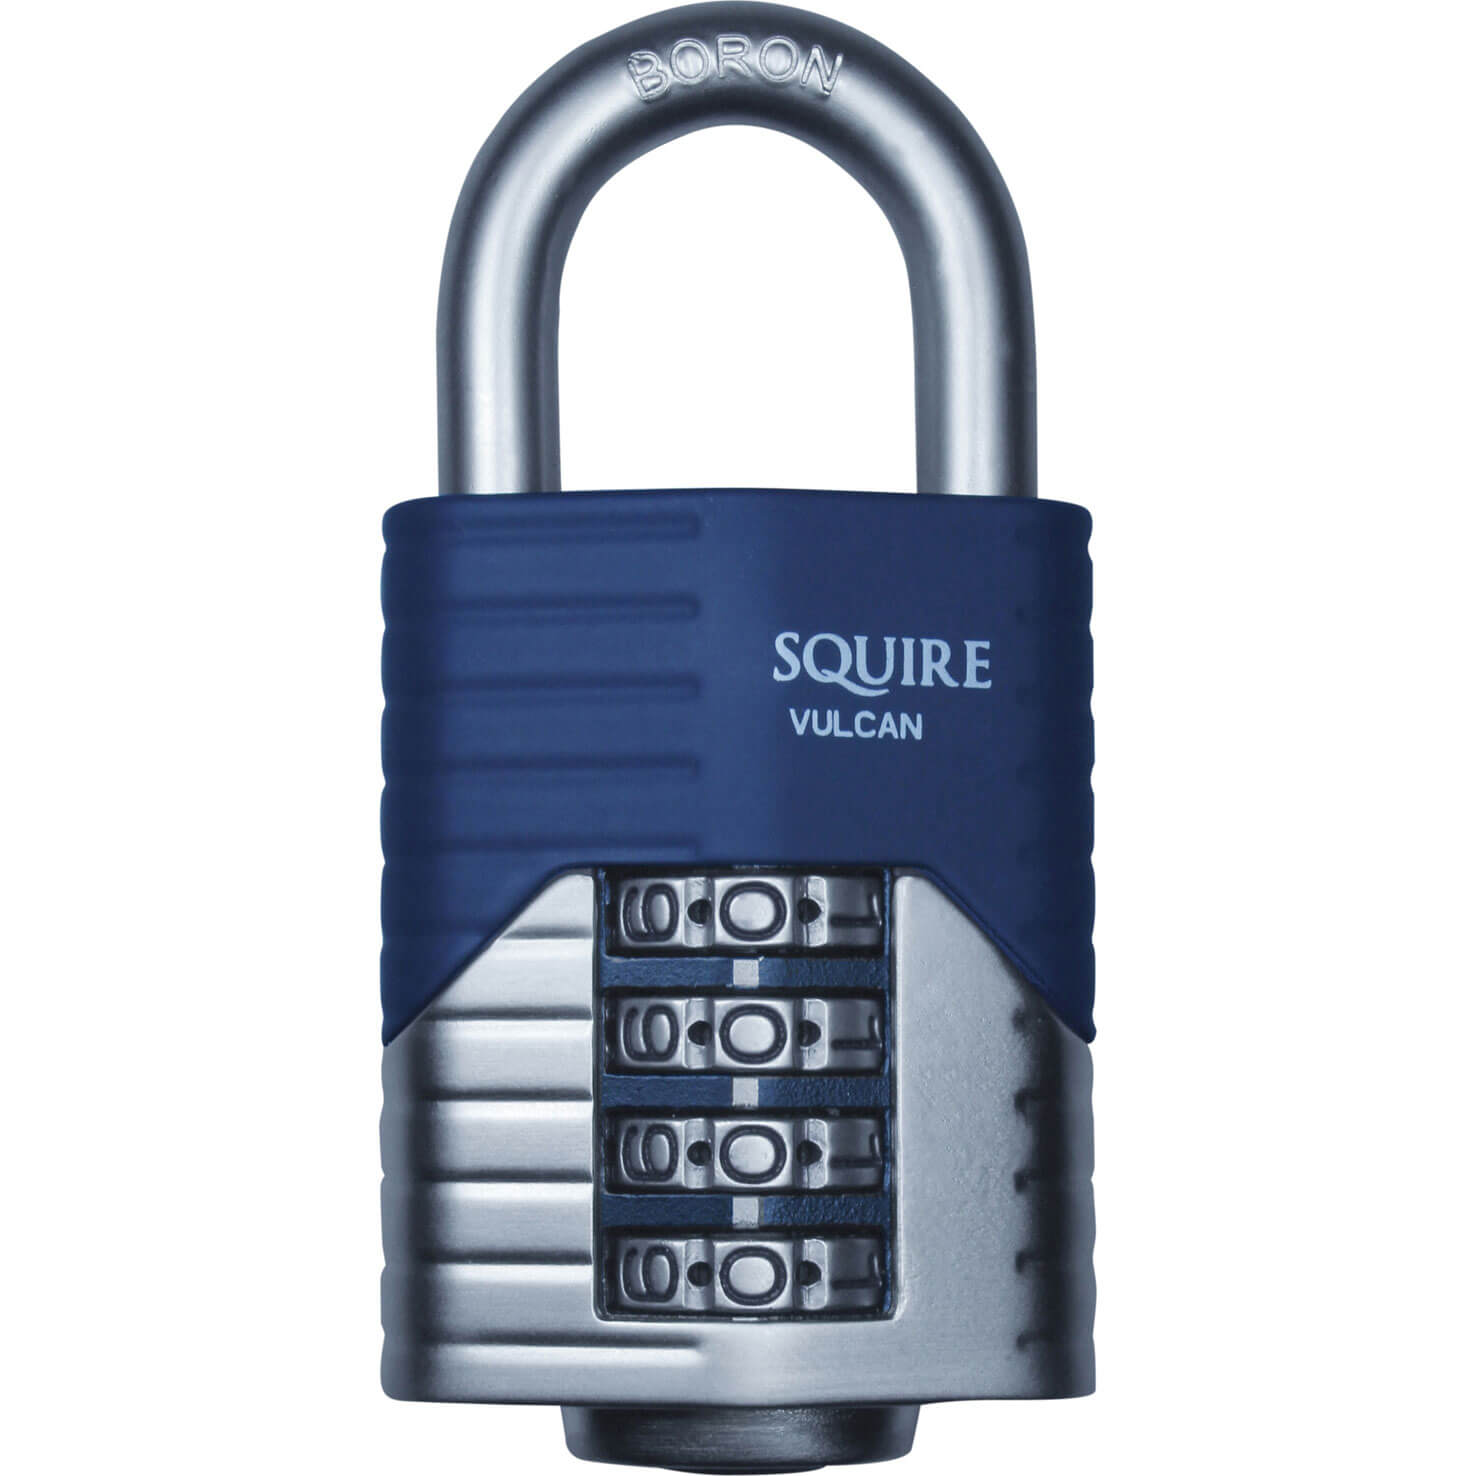 Image of Henry Squire Vulcan Boron Shackle Combination Padlock 60mm Standard